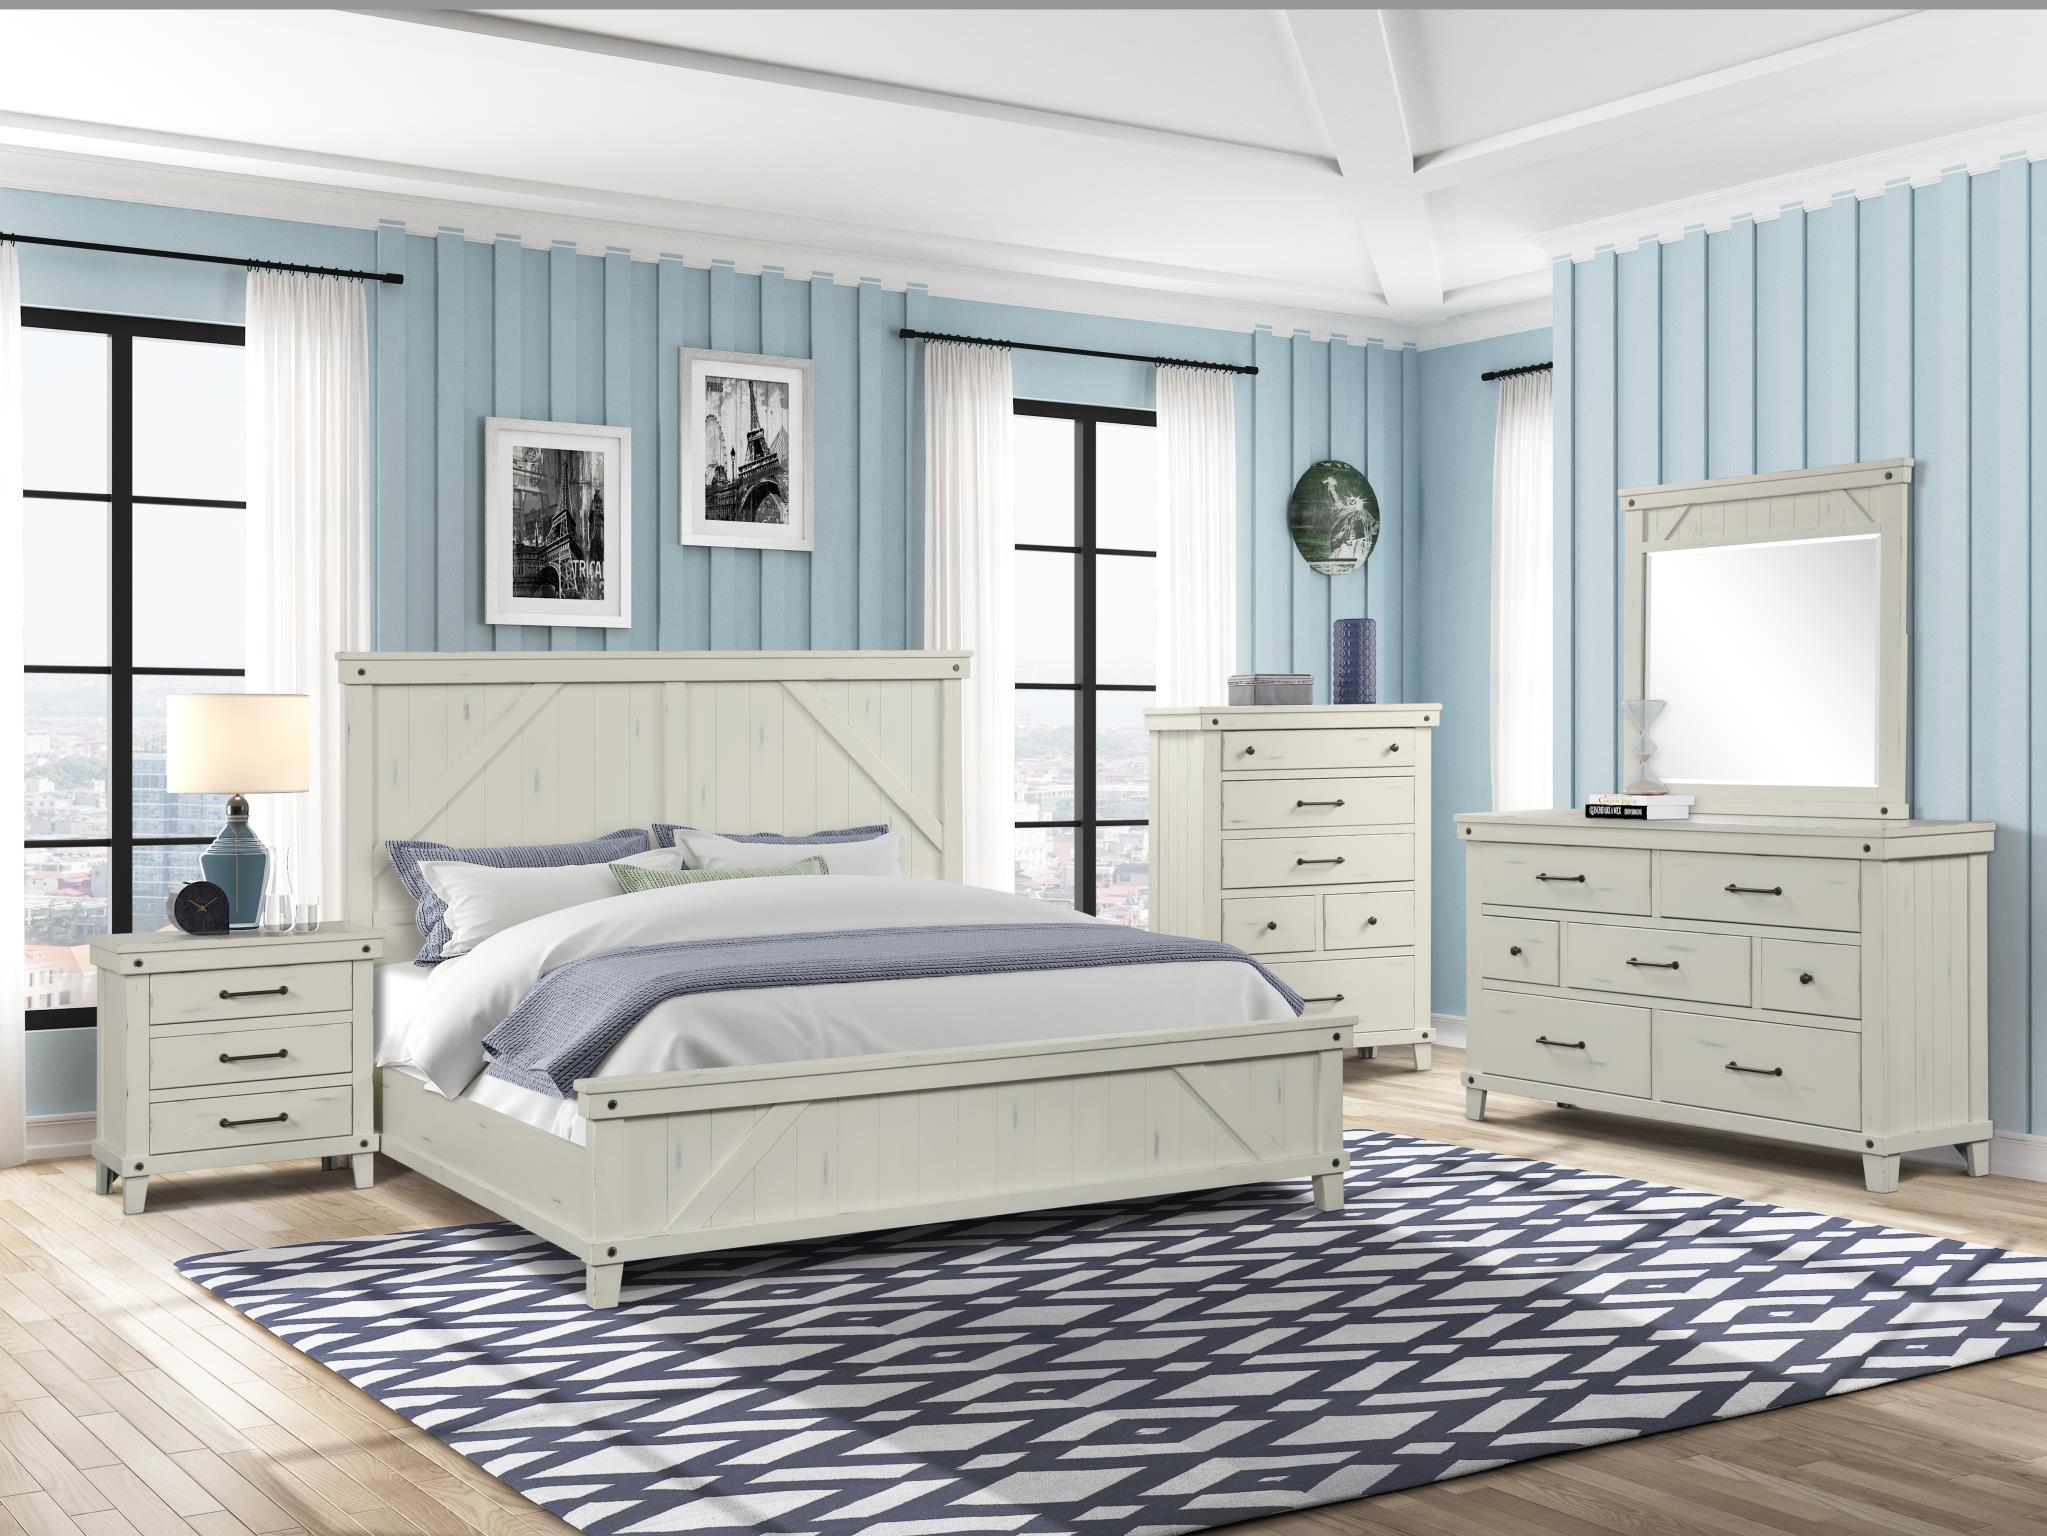 Featured image of post White Farmhouse King Bedroom Set / Buy farmhouse bedroom collections at macys.com!